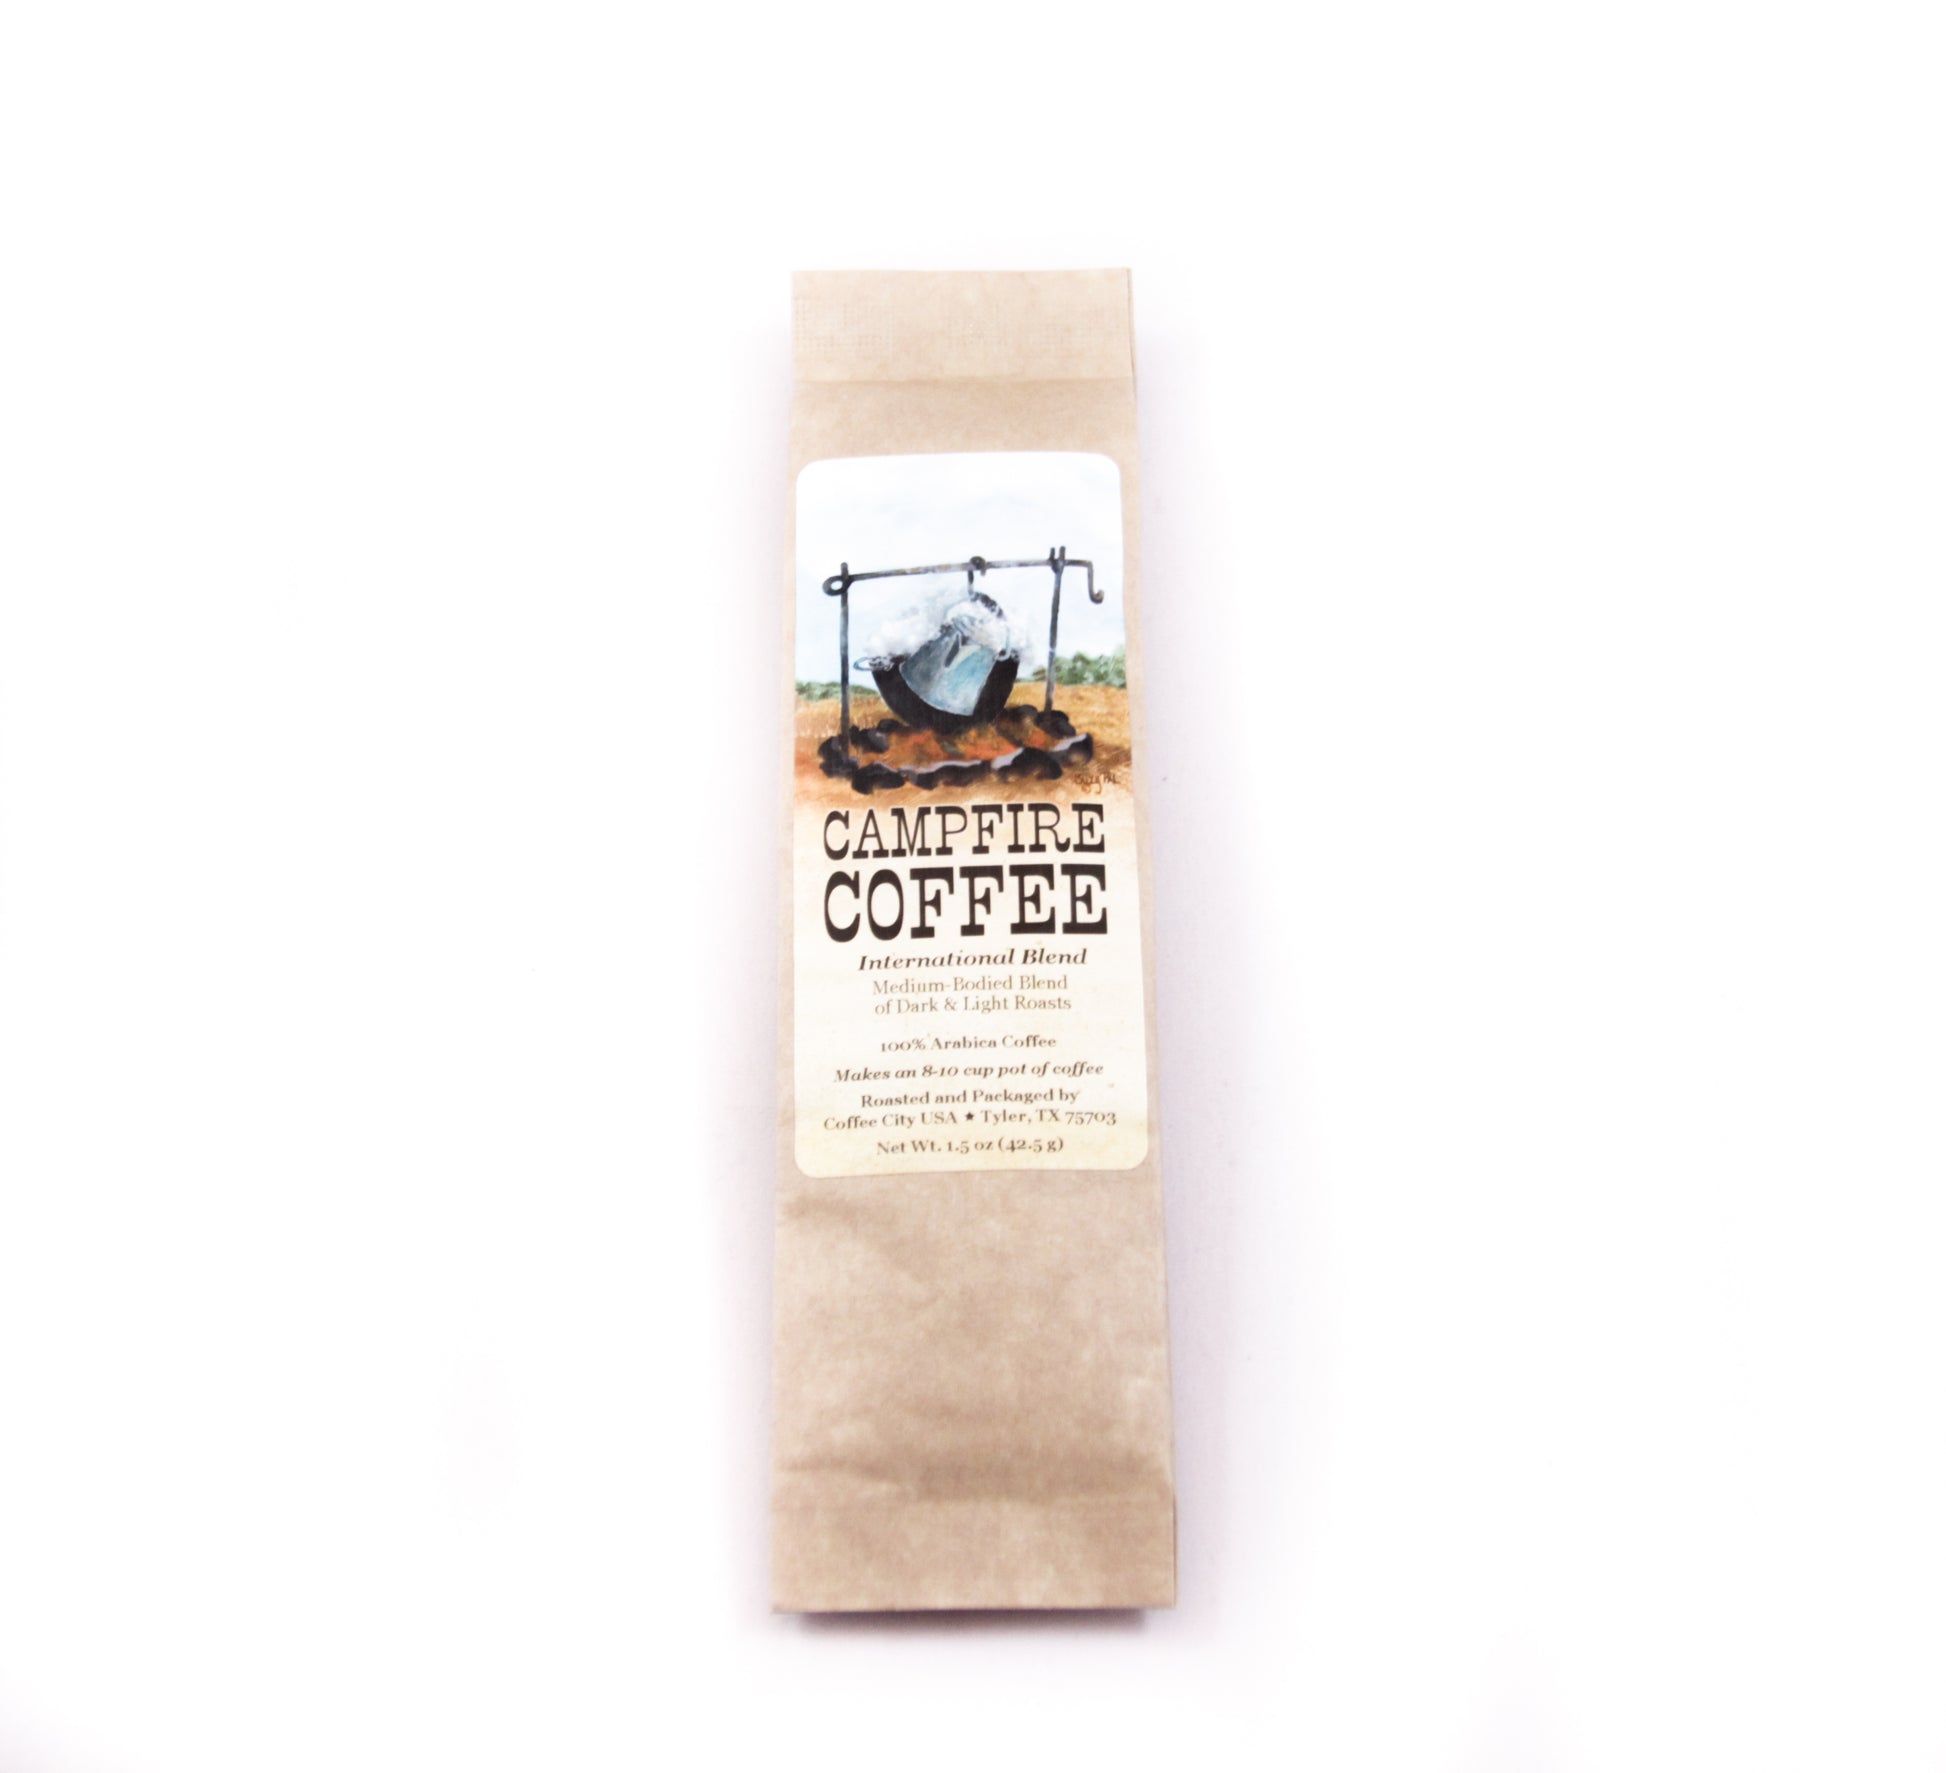 campfire coffee 1.5 ounces of ground coffee dark and light roast blend of morning cup of joe